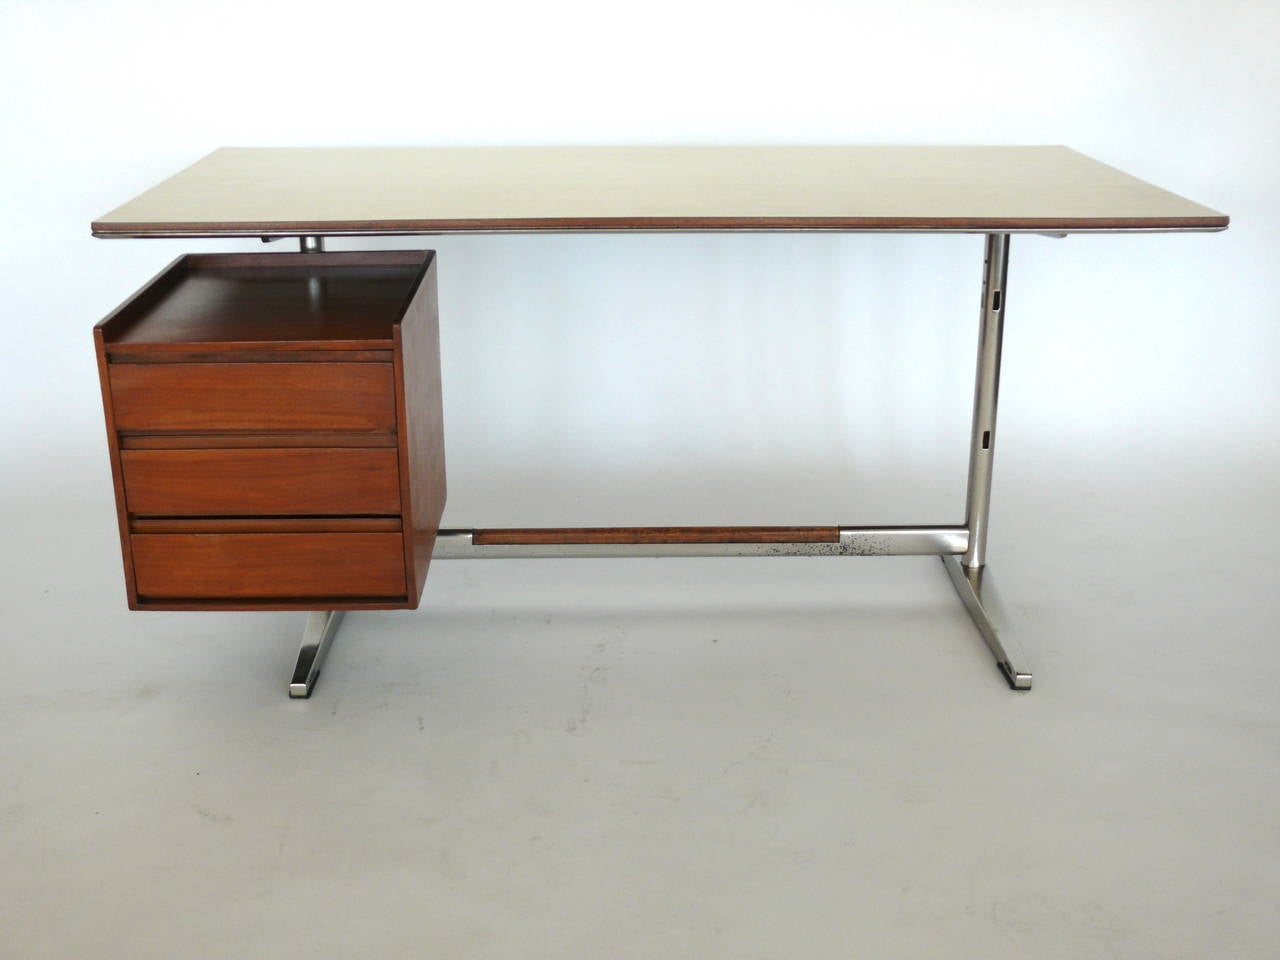 Fantastic writing desk by Fornaroli Rosselli for Studio Ponti. Desk was made in 1960 for the Pirelli skyscraper in Milan. Laminate top and ashwood floating pedestal with three drawers. Ashwood inlay on foot rest. Excellent vintage condition.